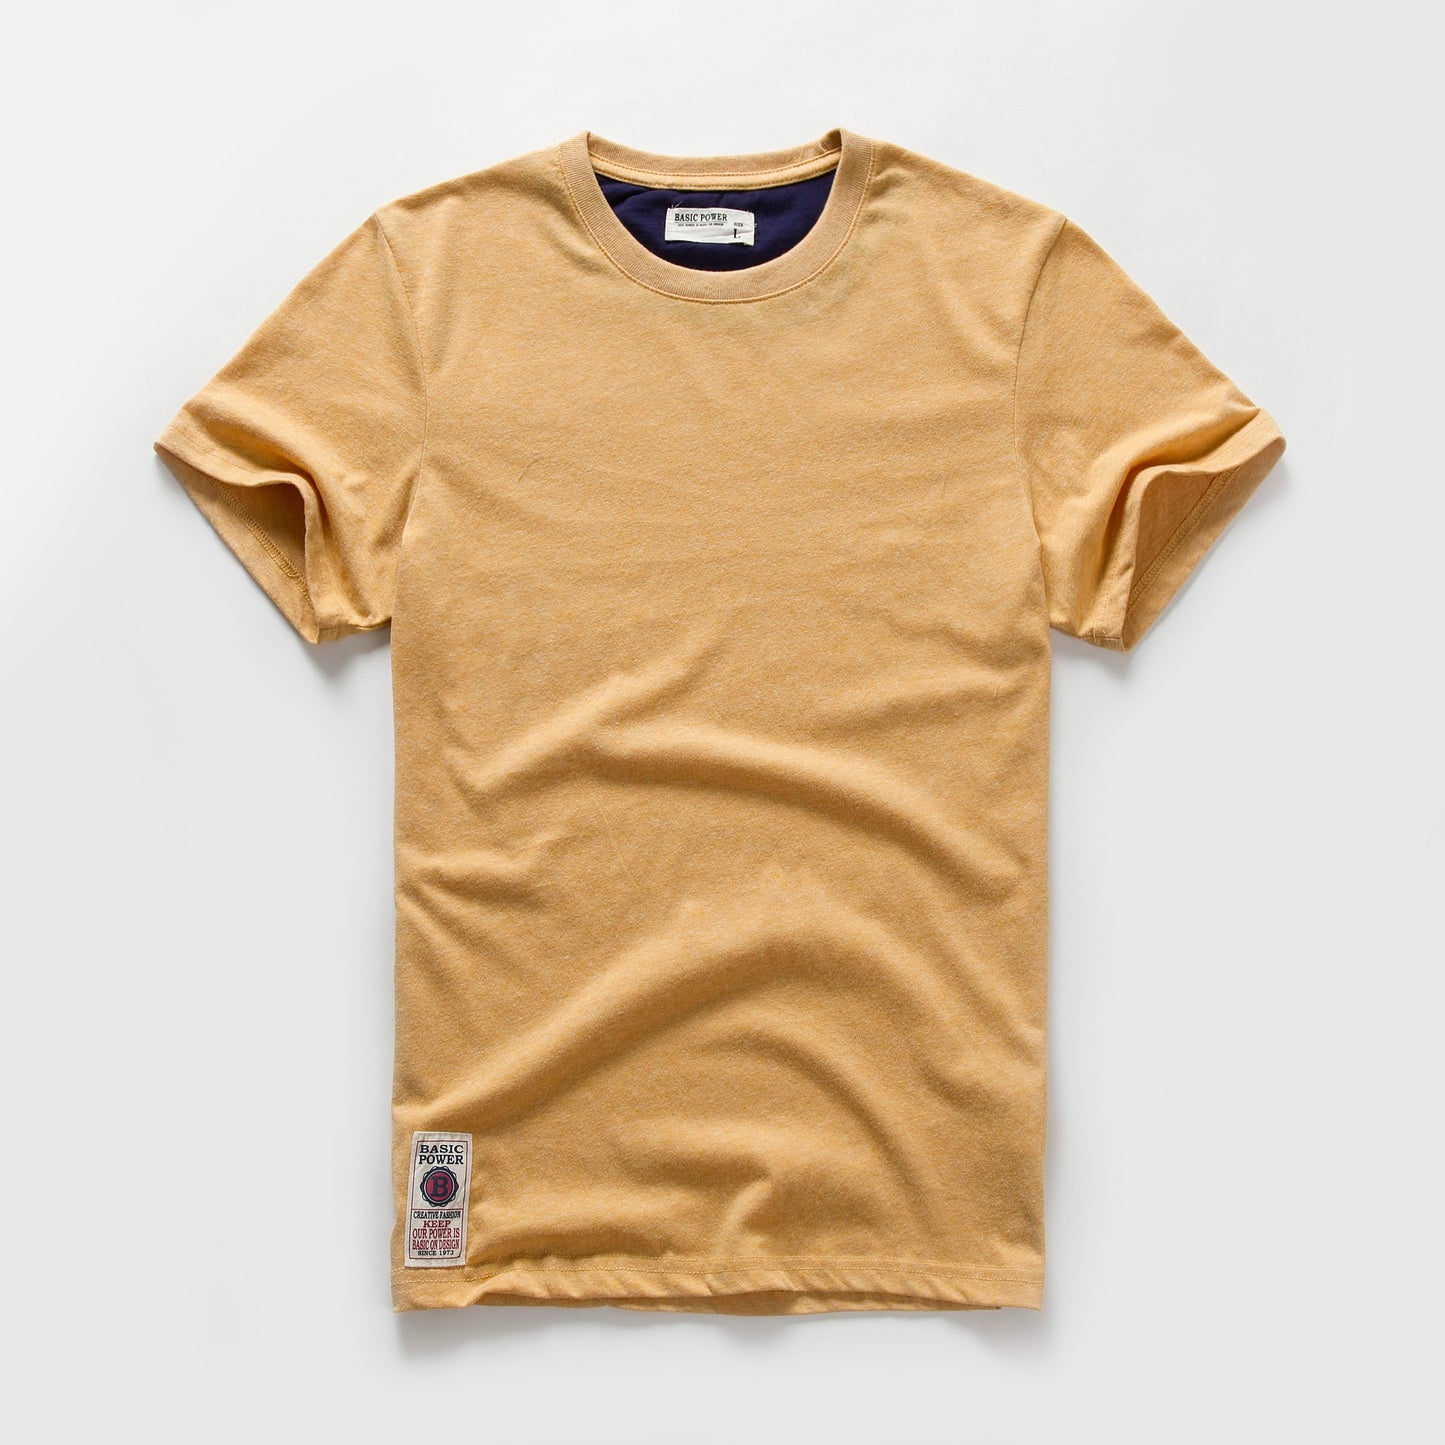 T-shirt Cotton Solid Color t shirt Men Causal O-neck Basic Tshirt Male